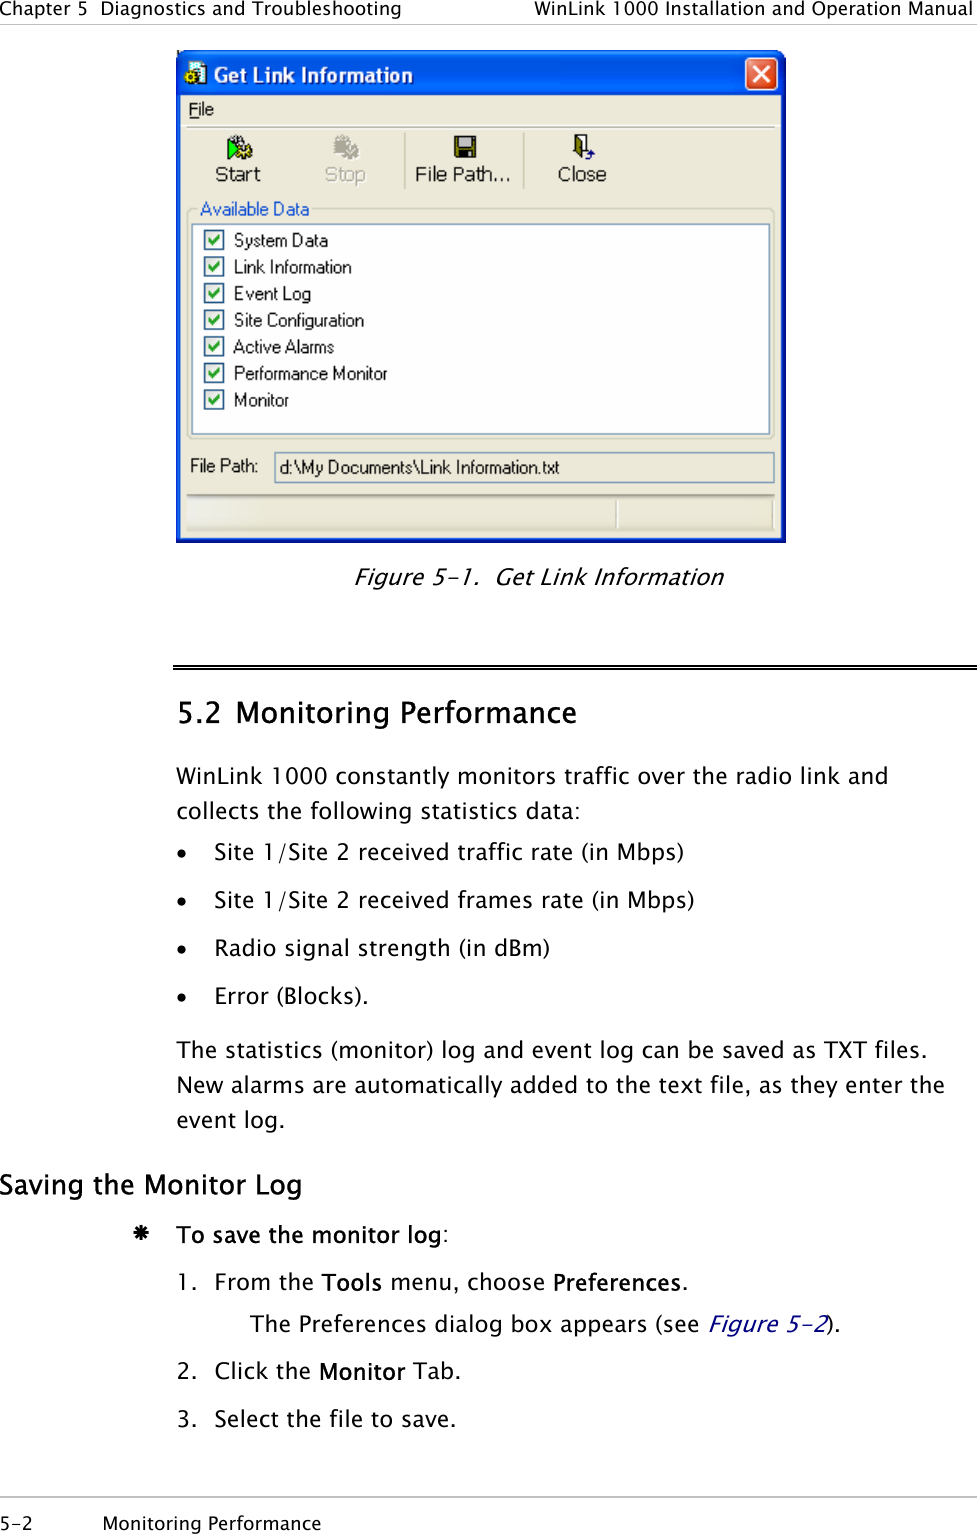 Chapter  5  Diagnostics and Troubleshooting  WinLink 1000 Installation and Operation Manual  Figure  5-1.  Get Link Information 5.2 Monitoring Performance WinLink 1000 constantly monitors traffic over the radio link and collects the following statistics data:  • Site 1/Site 2 received traffic rate (in Mbps) • Site 1/Site 2 received frames rate (in Mbps) • Radio signal strength (in dBm) • Error (Blocks). The statistics (monitor) log and event log can be saved as TXT files. New alarms are automatically added to the text file, as they enter the event log. Saving the Monitor Log Æ To save the monitor log: 1. From the Tools menu, choose Preferences. The Preferences dialog box appears (see Figure  5-2).  2. Click the Monitor Tab. 3. Select the file to save. 5-2 Monitoring Performance  